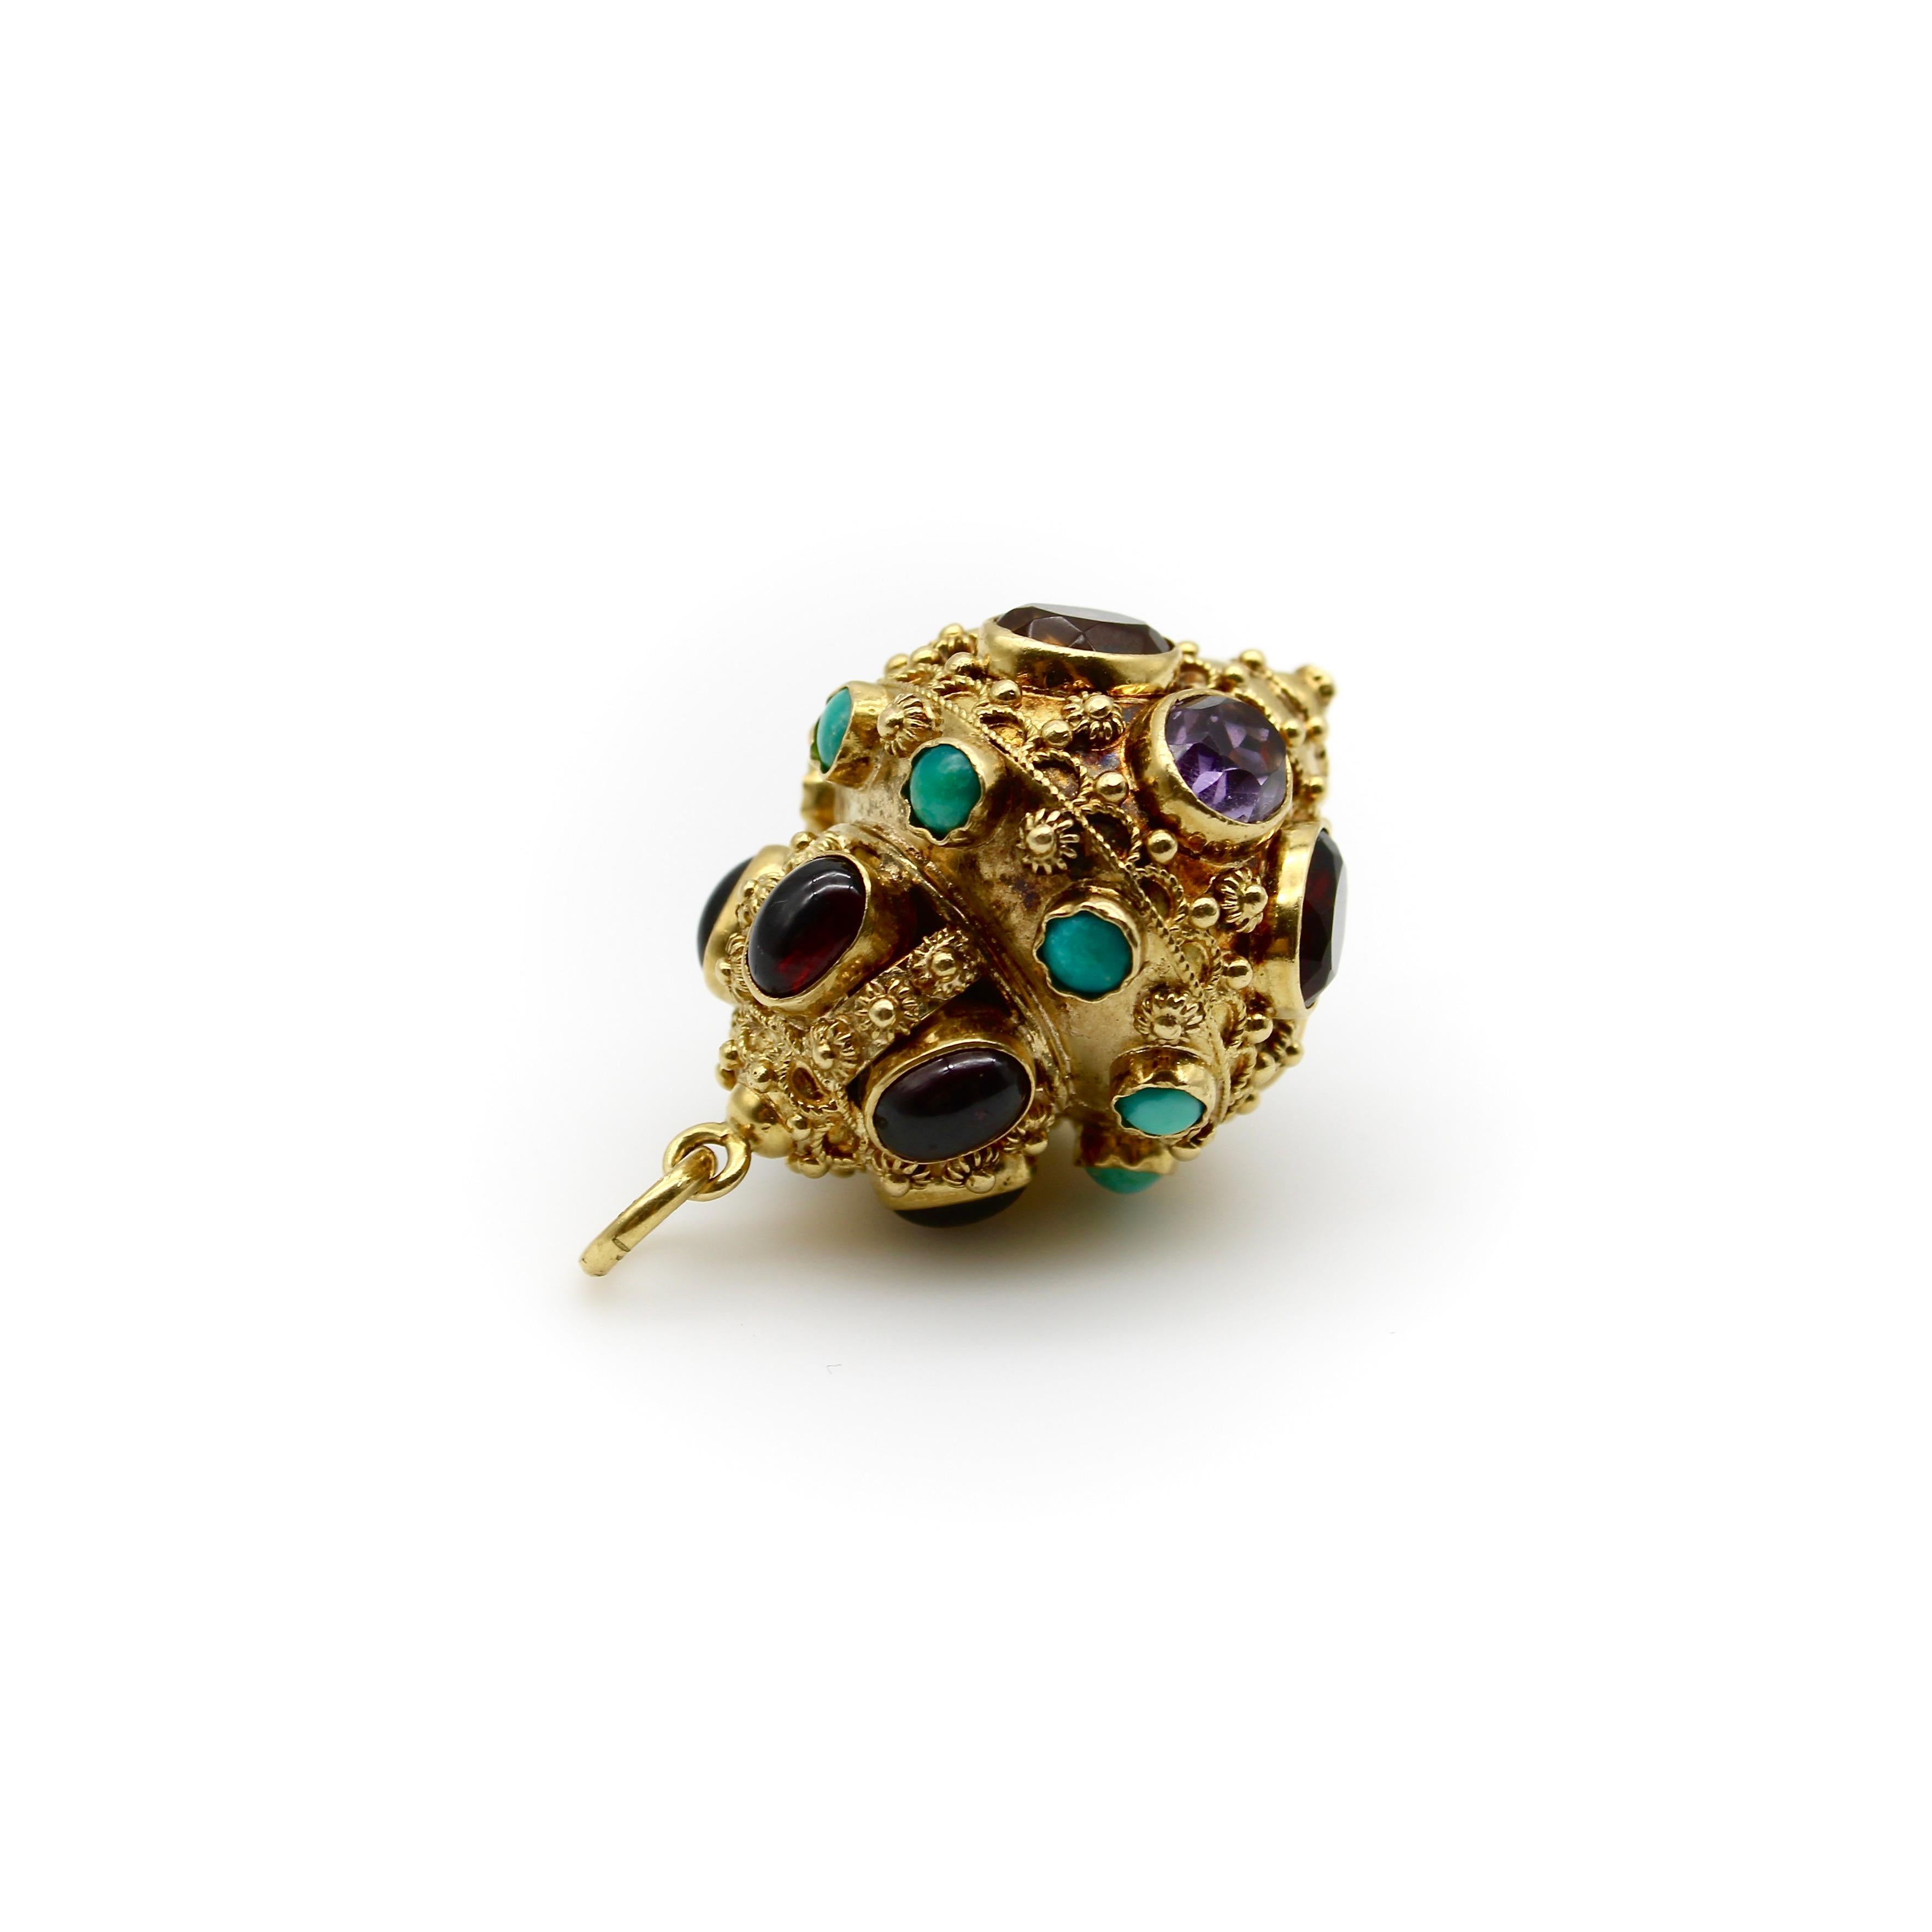 Vintage 18K Gold Etruscan Revival Extra Large Lantern Charm w/ Encrusted Jewels In Good Condition For Sale In Venice, CA